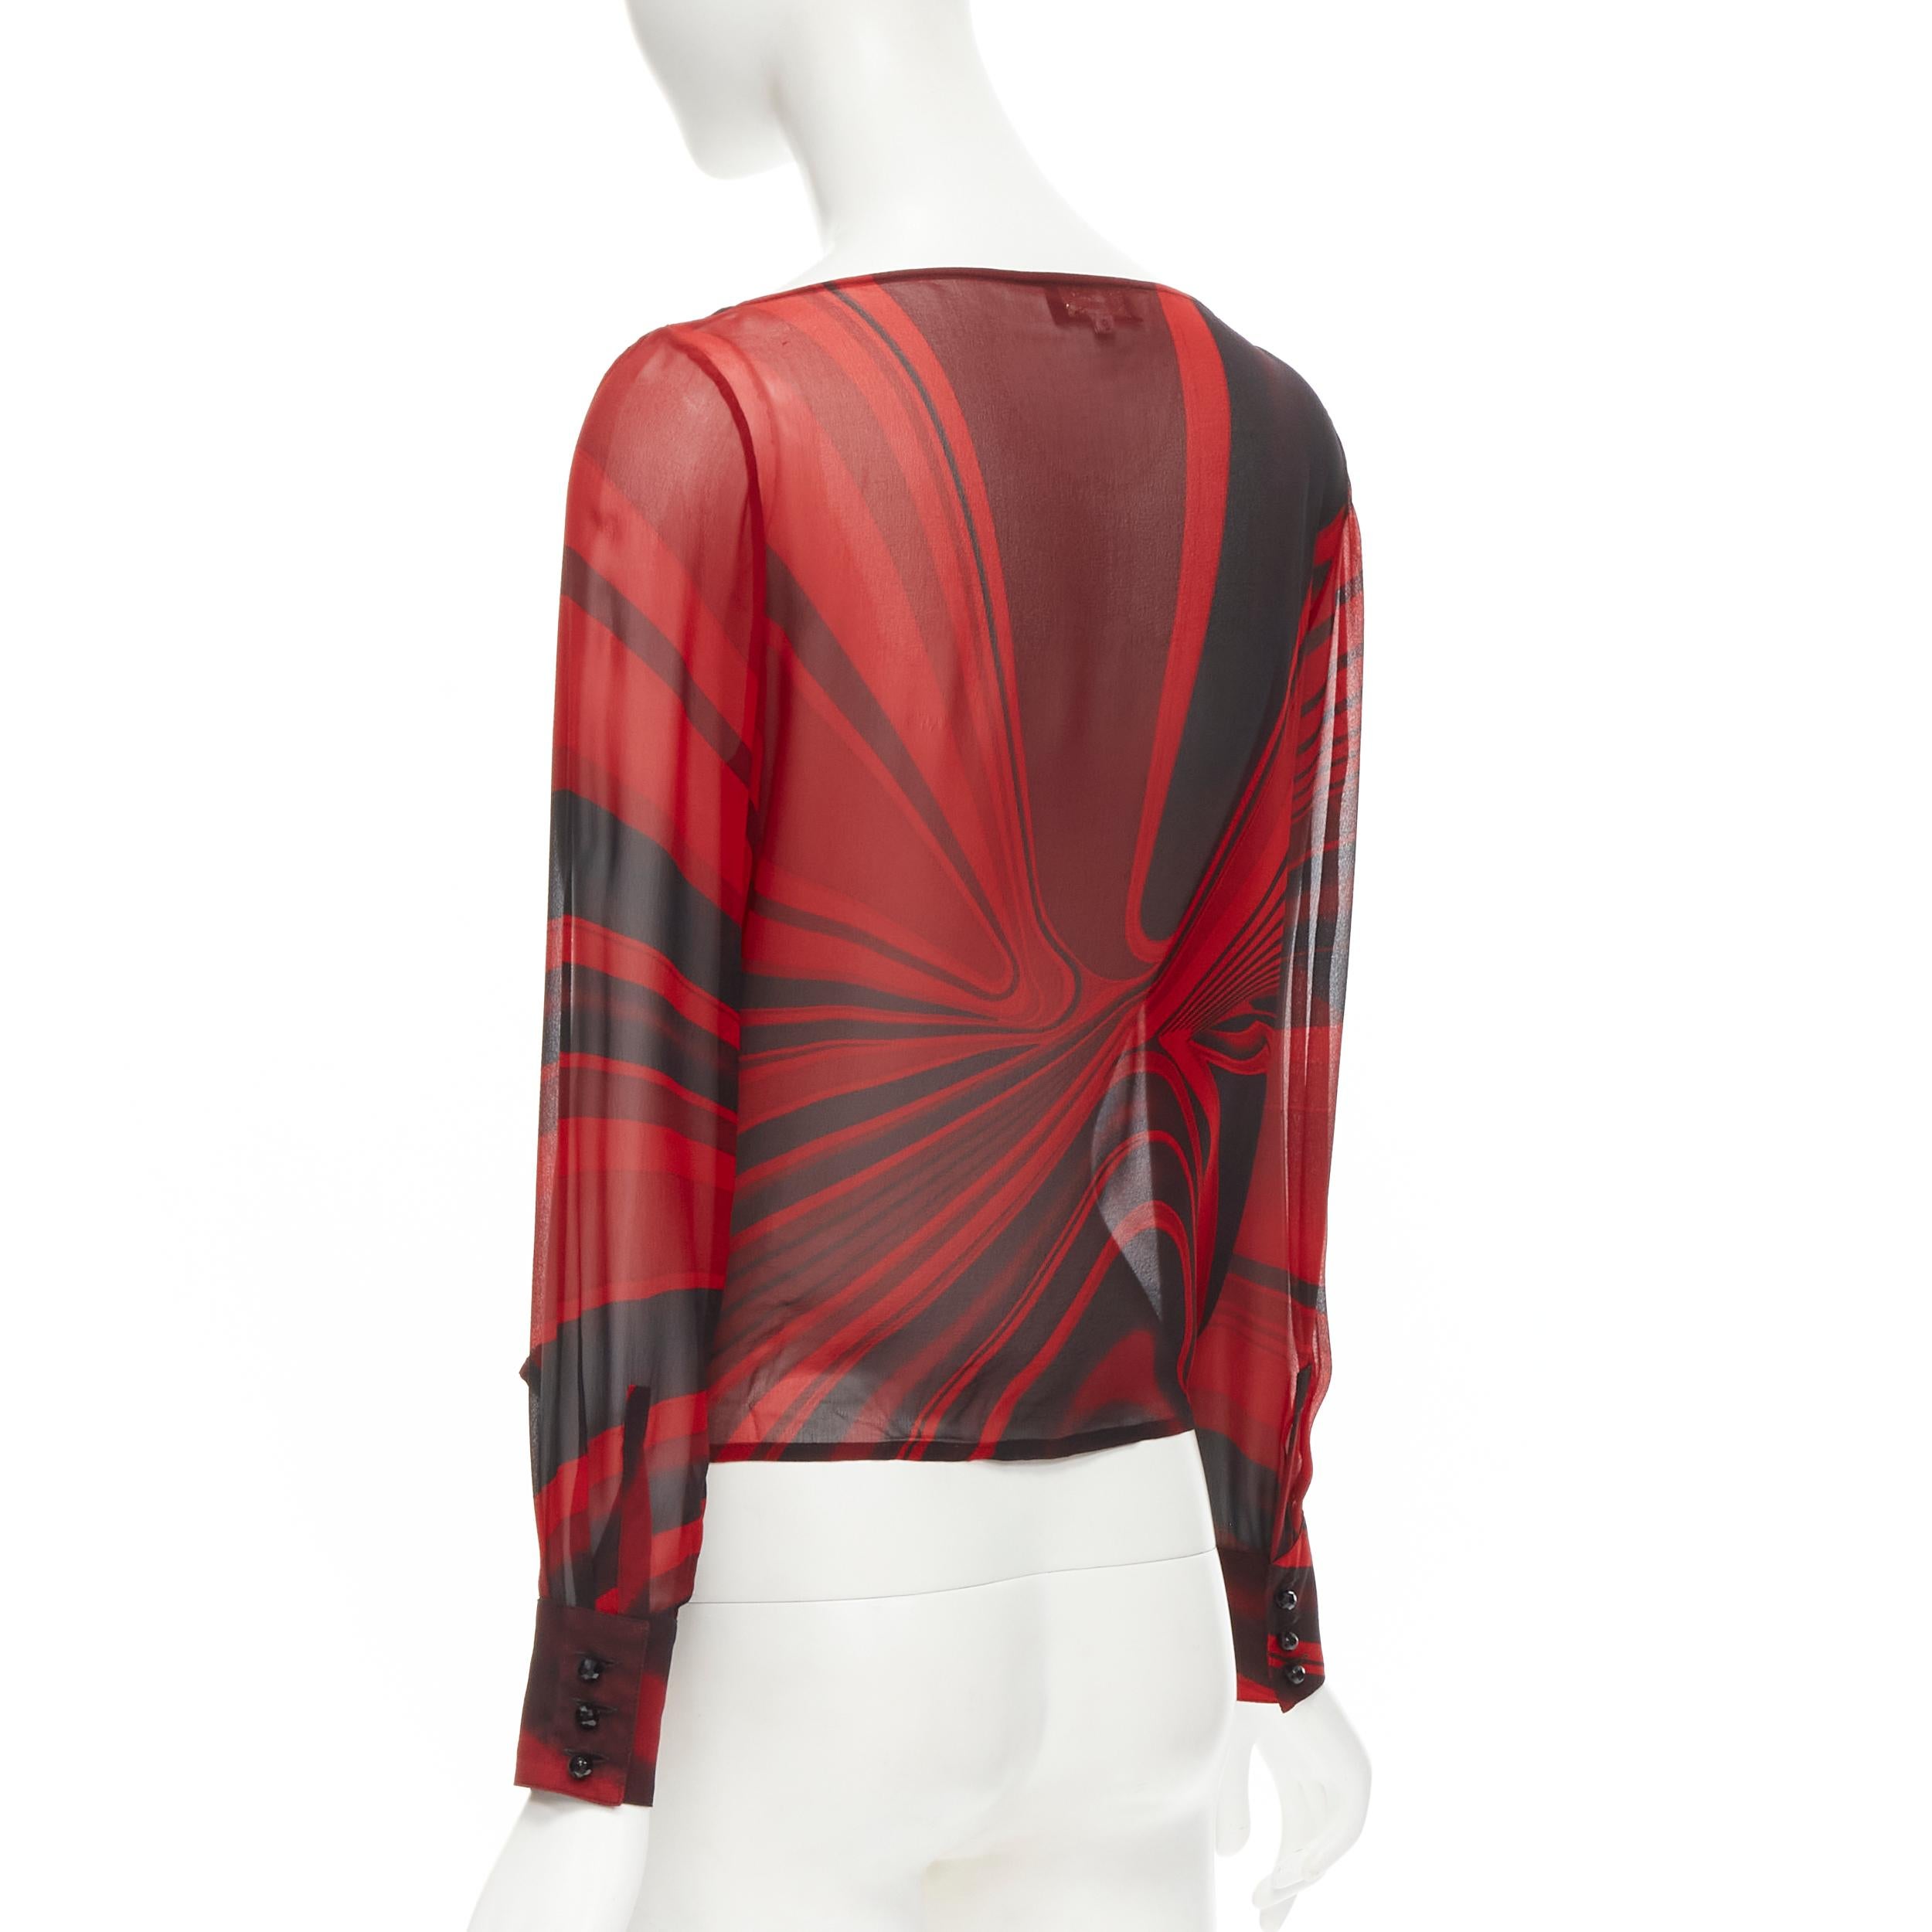 GIANNI VERSACE Vintage black red swirl print crossover wrap top IT42 M 1